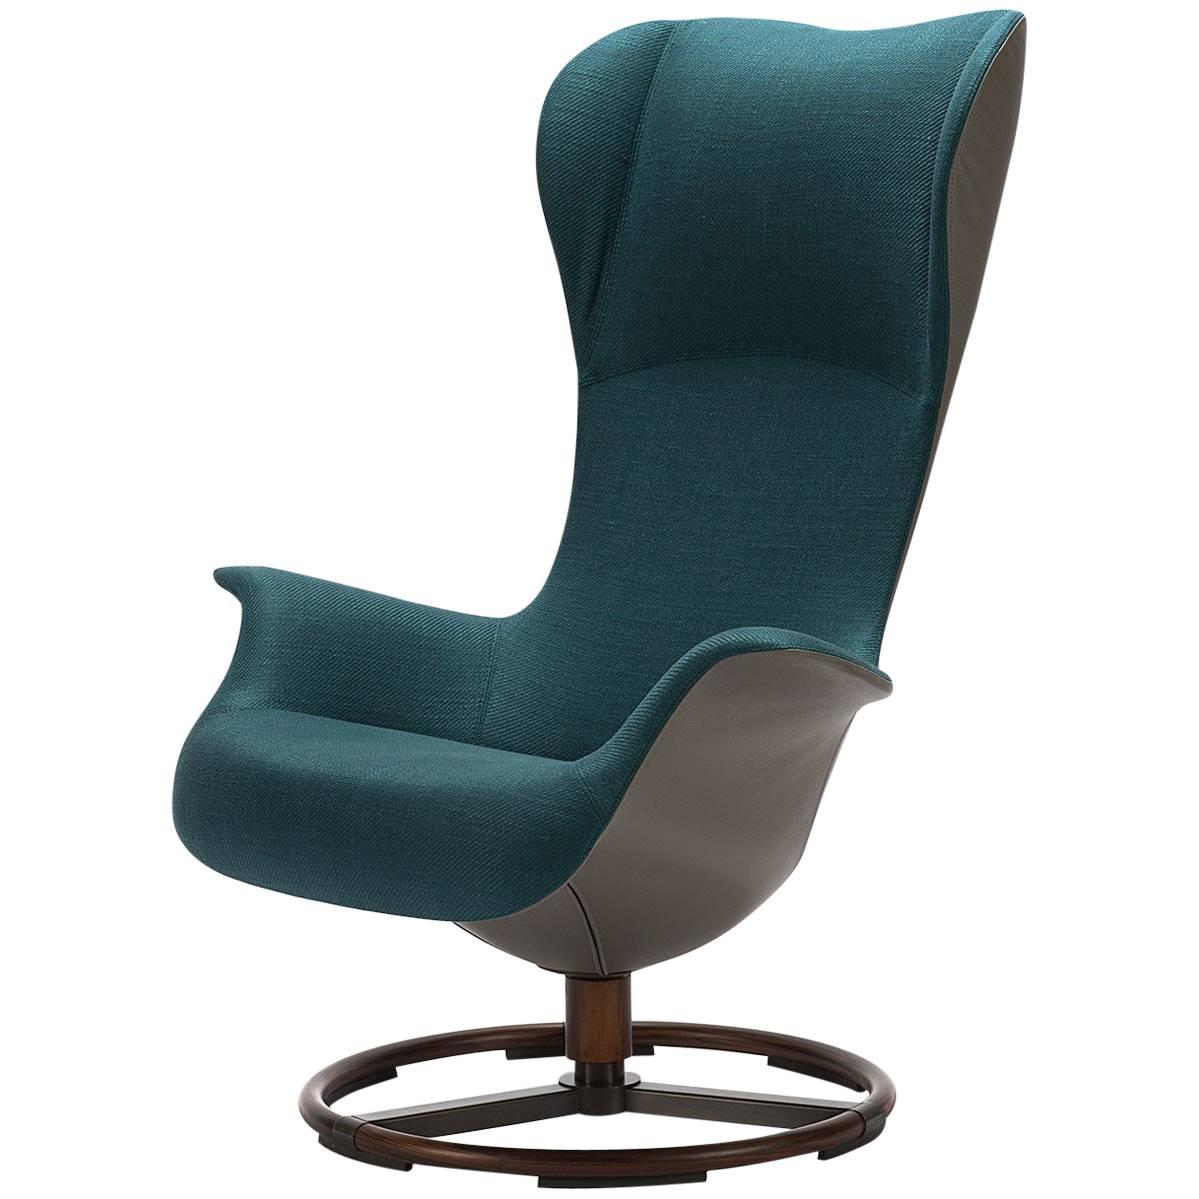 Teal Fabric & Taupe Italian Leather Tilt Swivel Ergonomic Wing Chair, Giorgetti